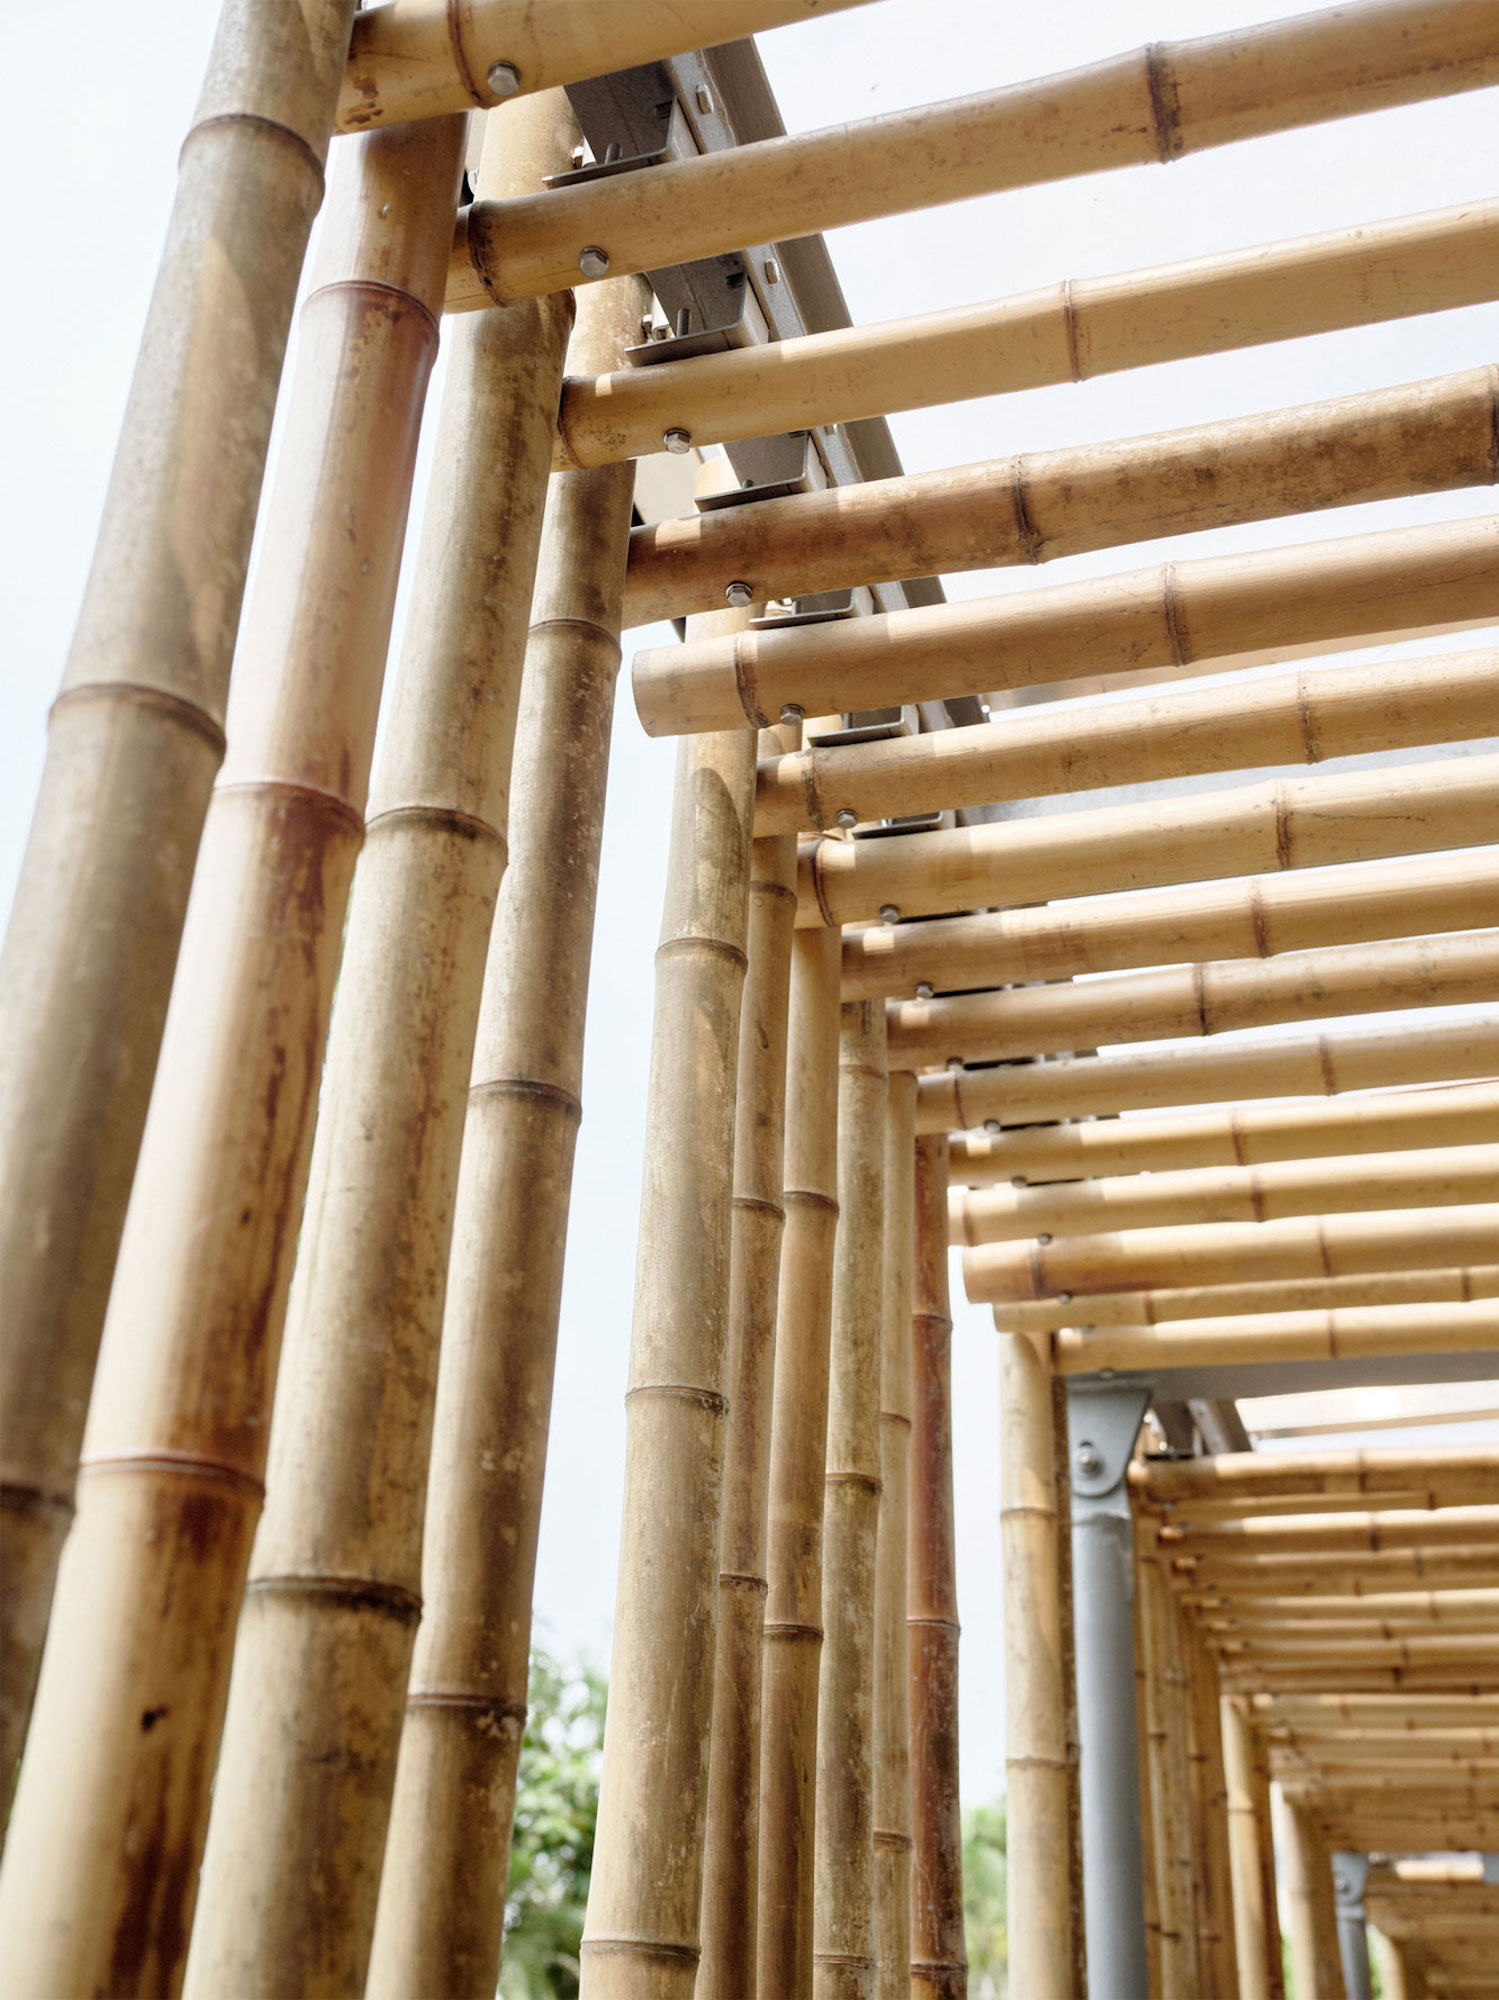 Impromptu Projects incorporates bamboo into many of their works, both at home and abroad